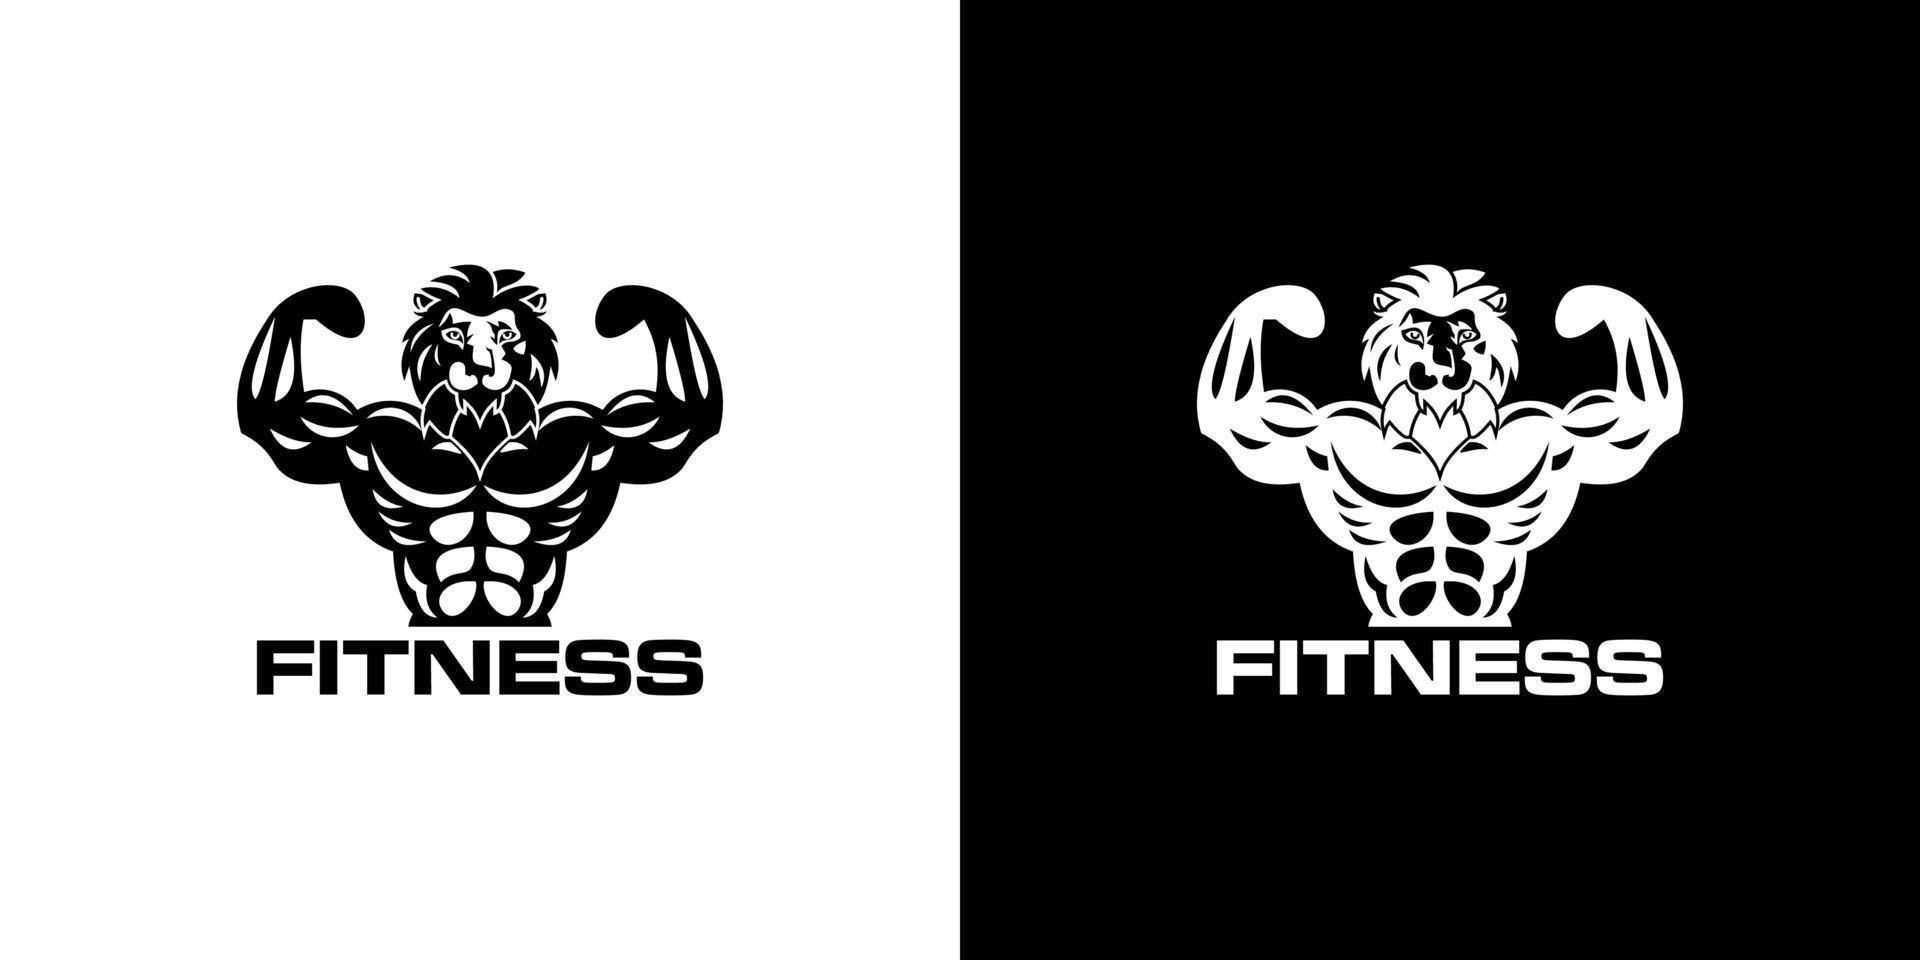 Fitness Gym logo design template. Labels in vintage style with sport silhouette symbols vector